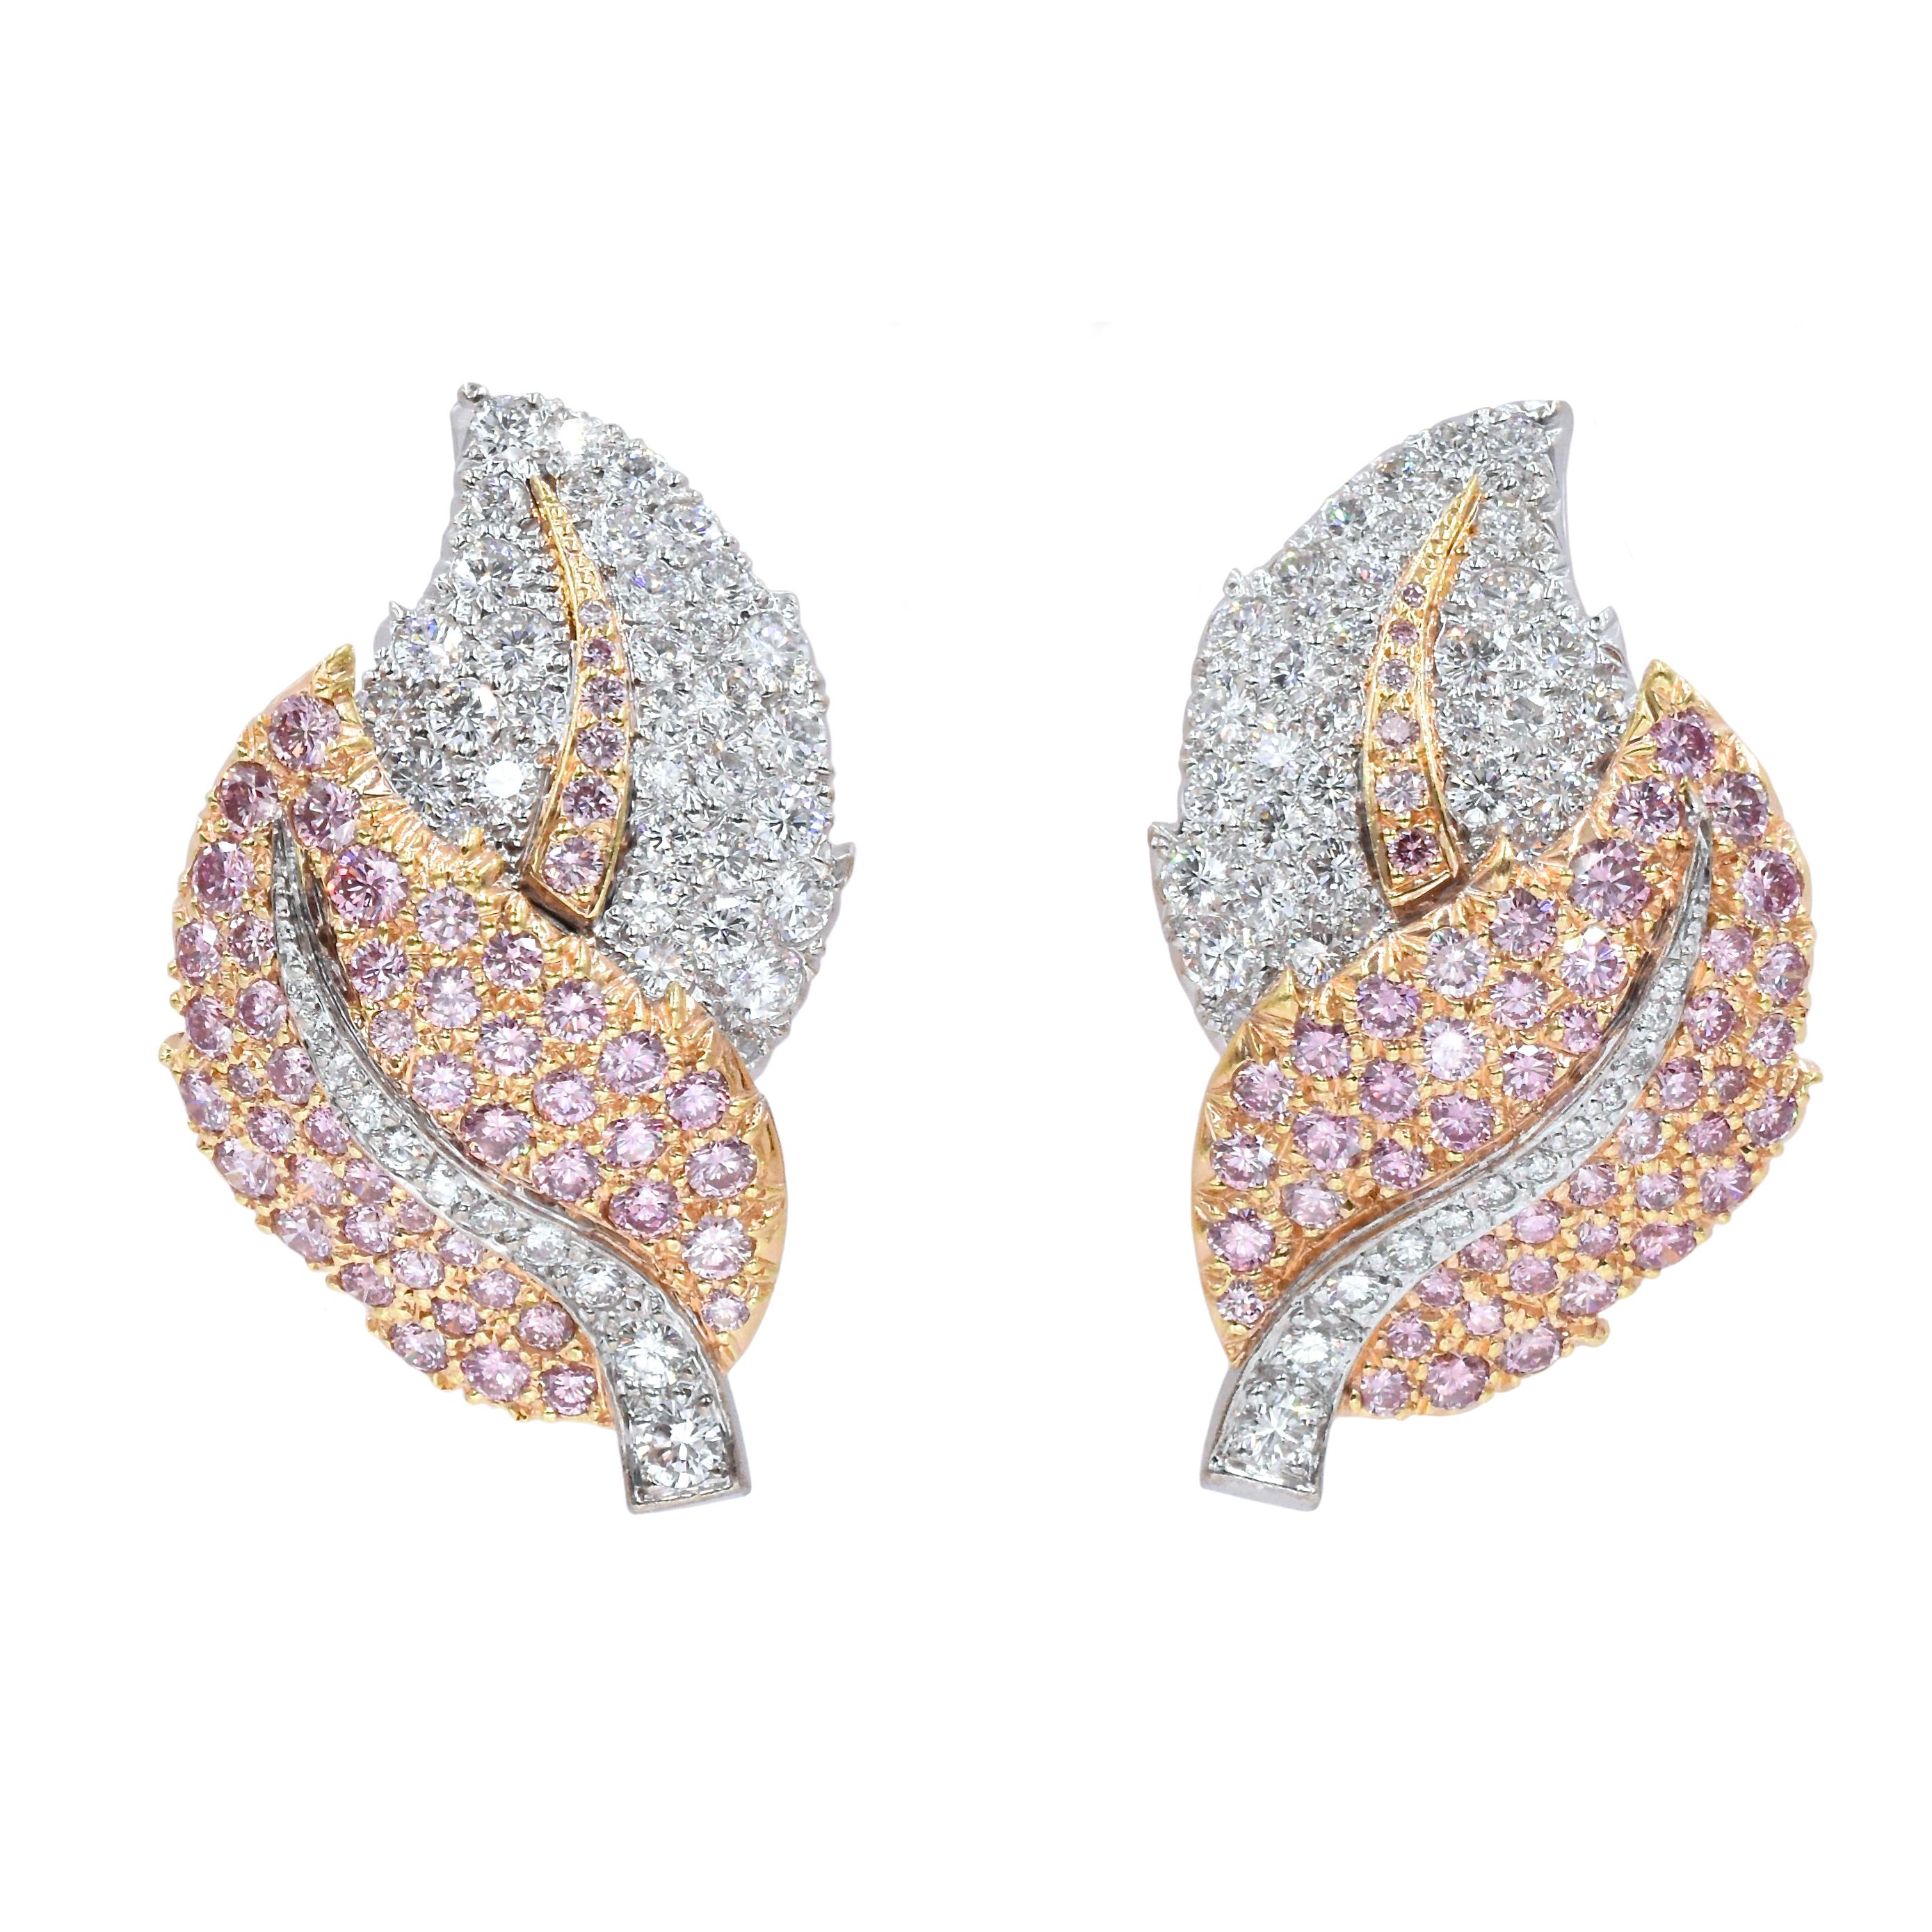 Beautiful double leaf style earrings by Graff. 

112 brilliant colorless diamonds, with total weight of 3 carats.
106 Pink brilliant cut diamonds with total weight of 3.1

With makers signature: GRAFF

18k white gold & rose